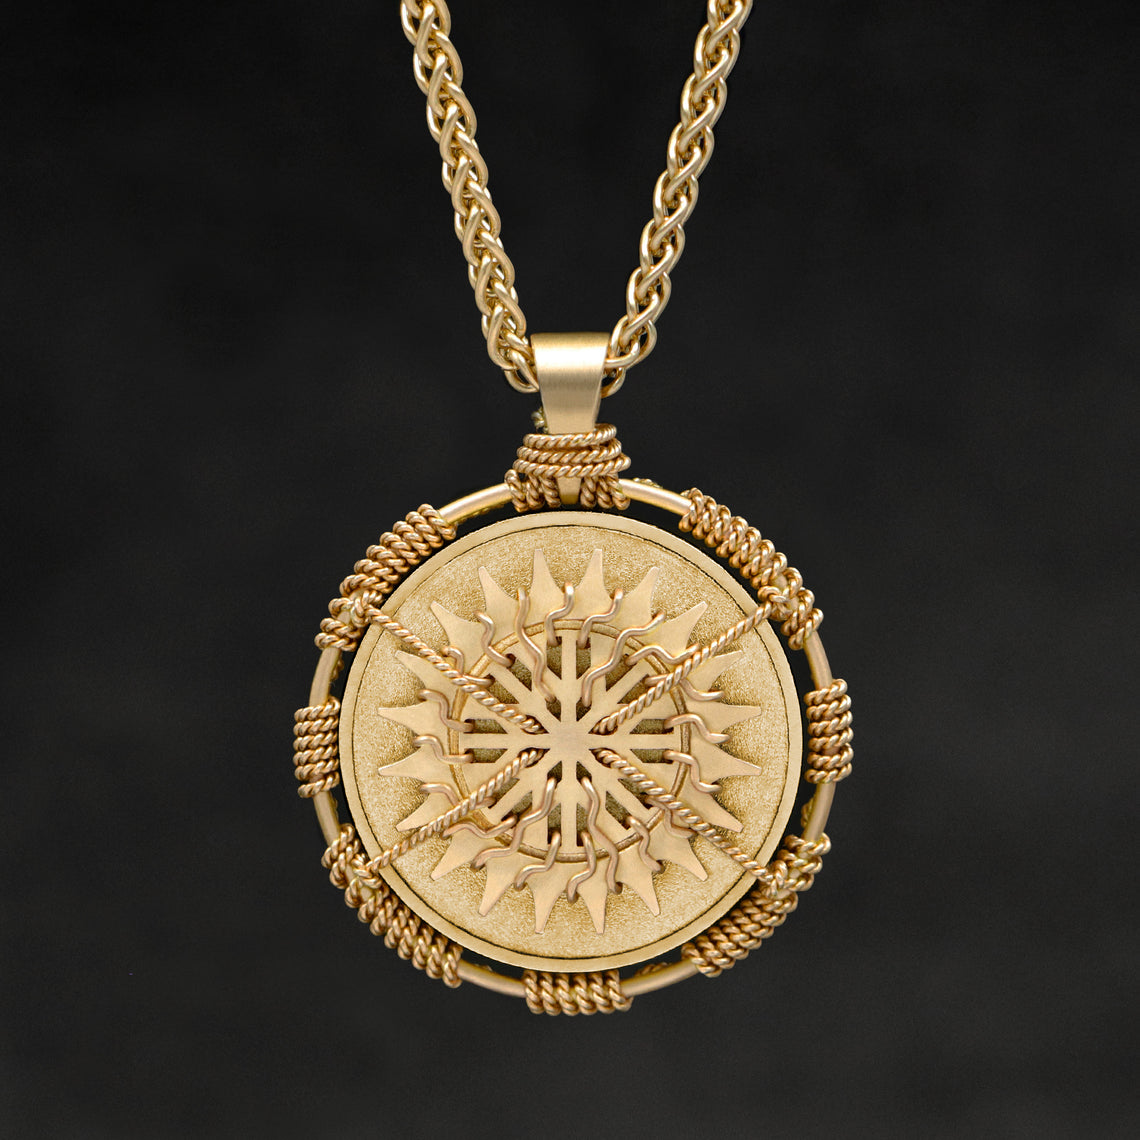 Hanging front view of 18K Yellow Gold Sewn Gold Metal Sun pendant and chain with endless loop necklace featuring 20 pointed gear by Caps Brothers